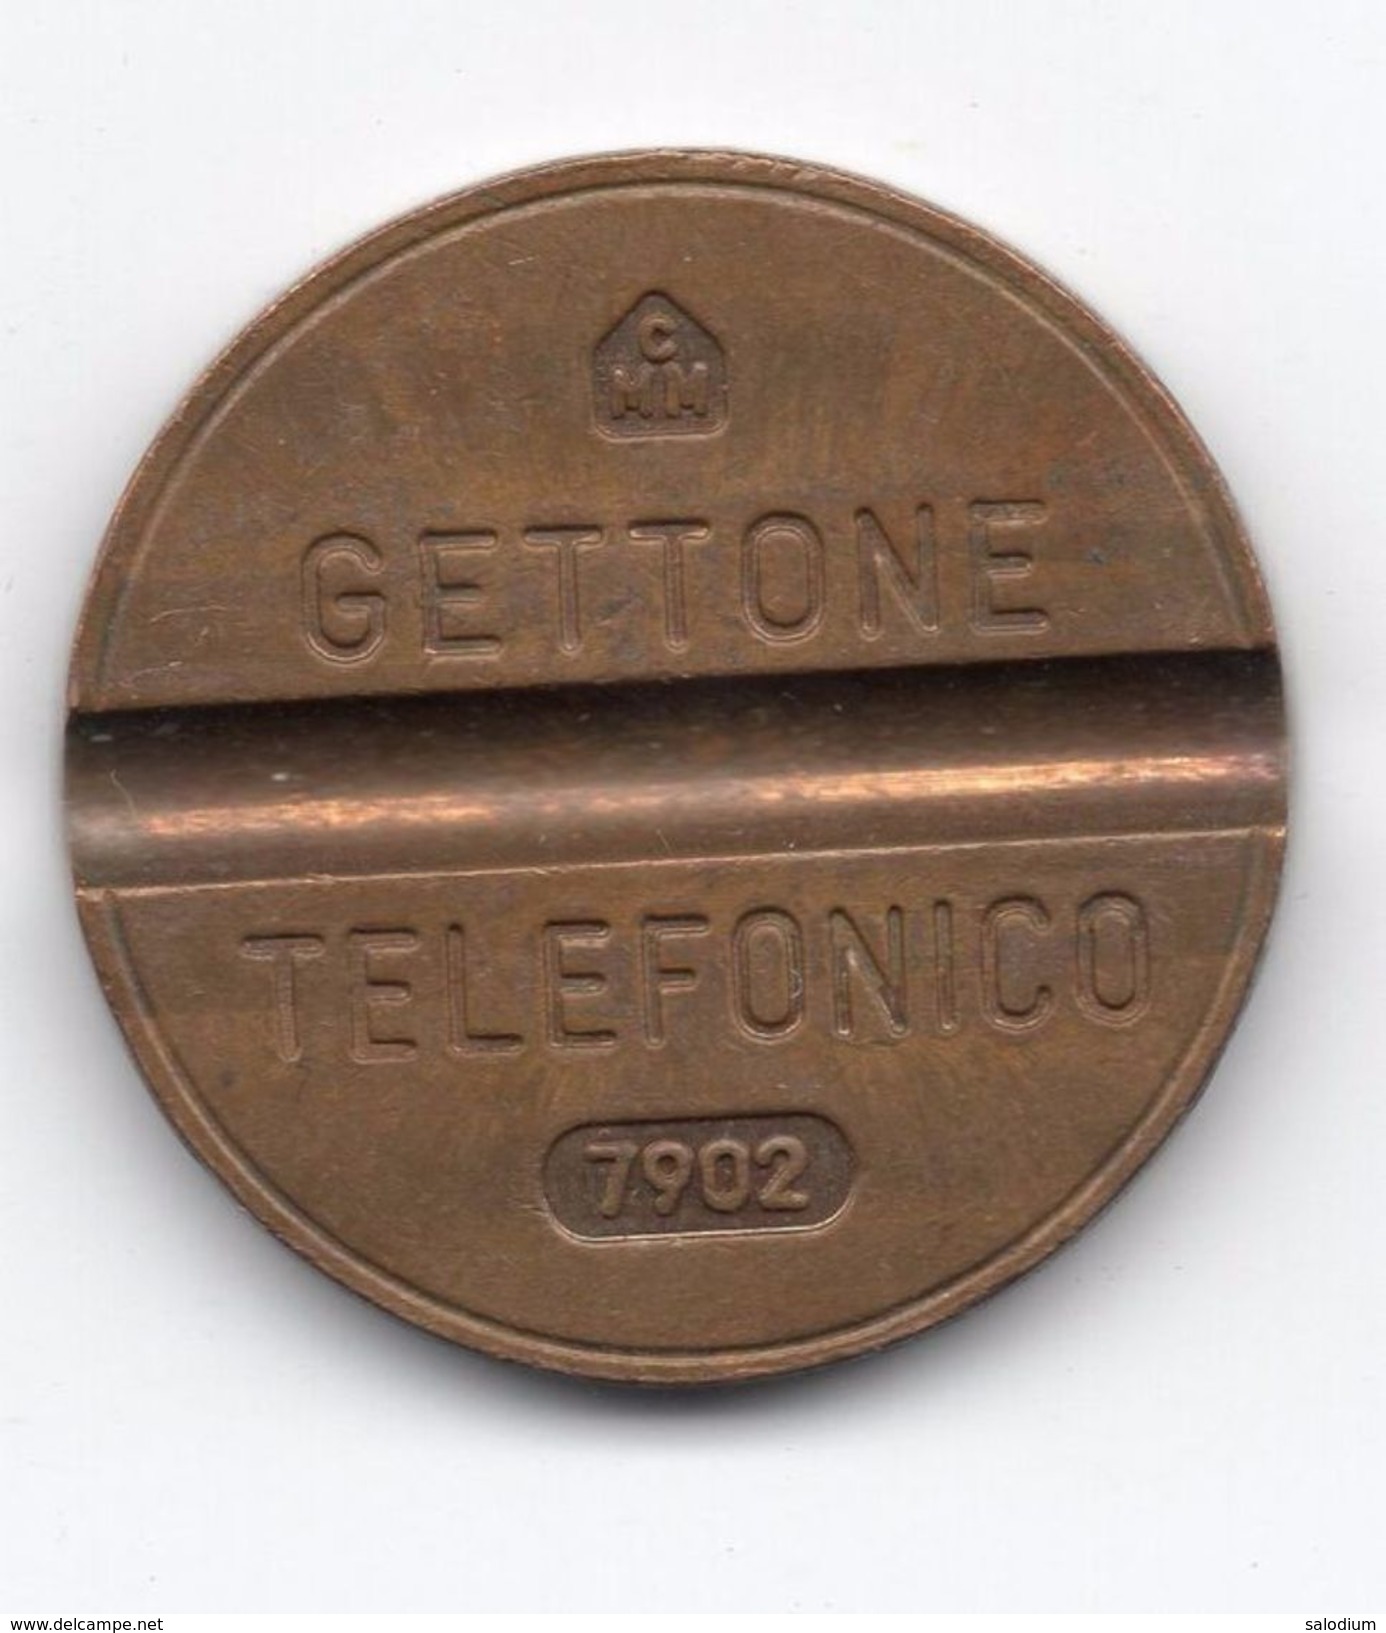 Gettone Telefonico 7902 Token Telephone - (Id-771) - Professionals/Firms